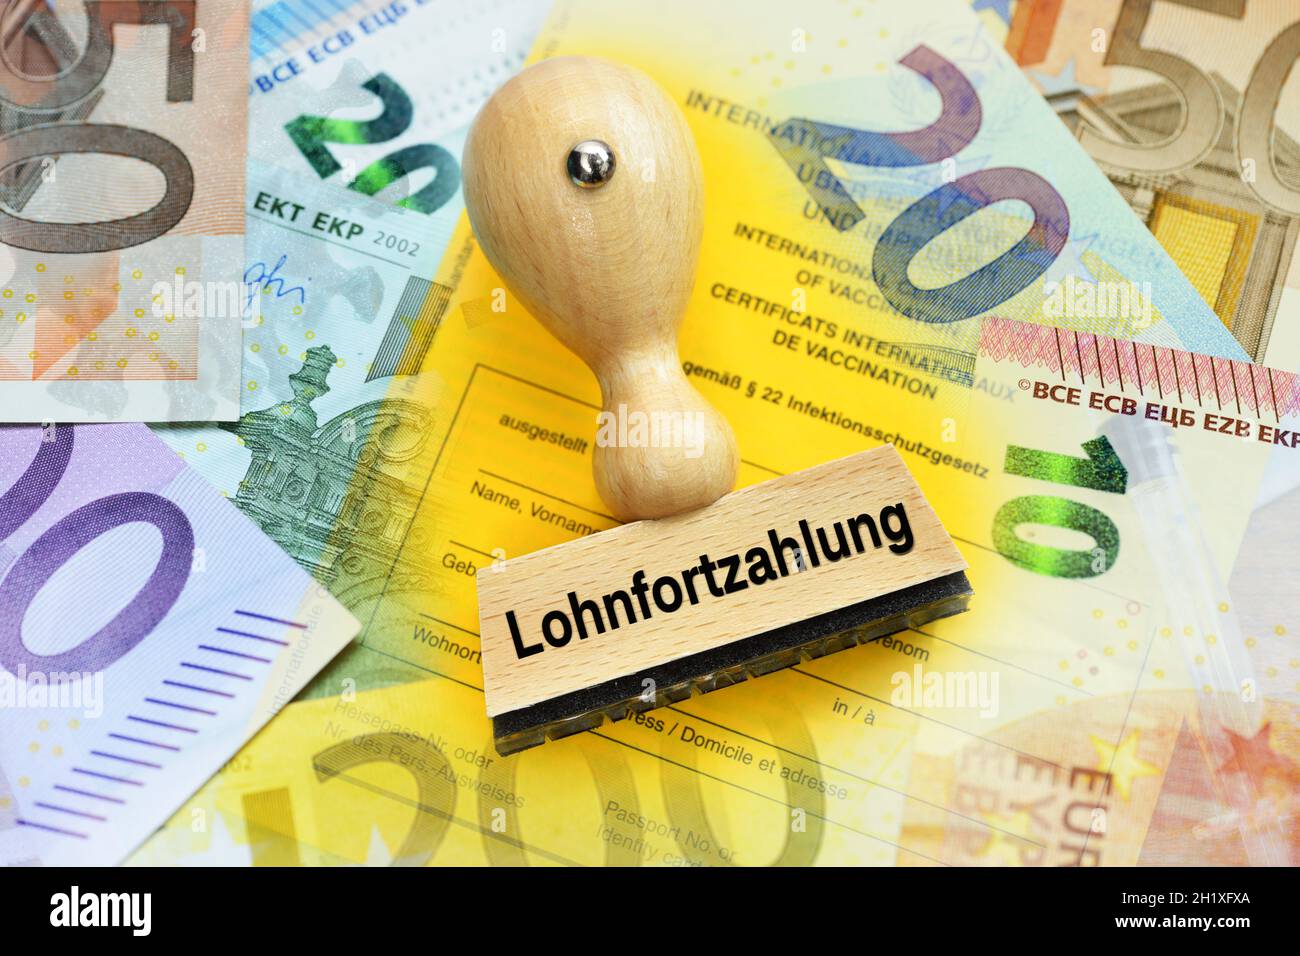 German Word For Continued Payment Of Wages On Stamp Lying On A Vaccination Card Stock Photo